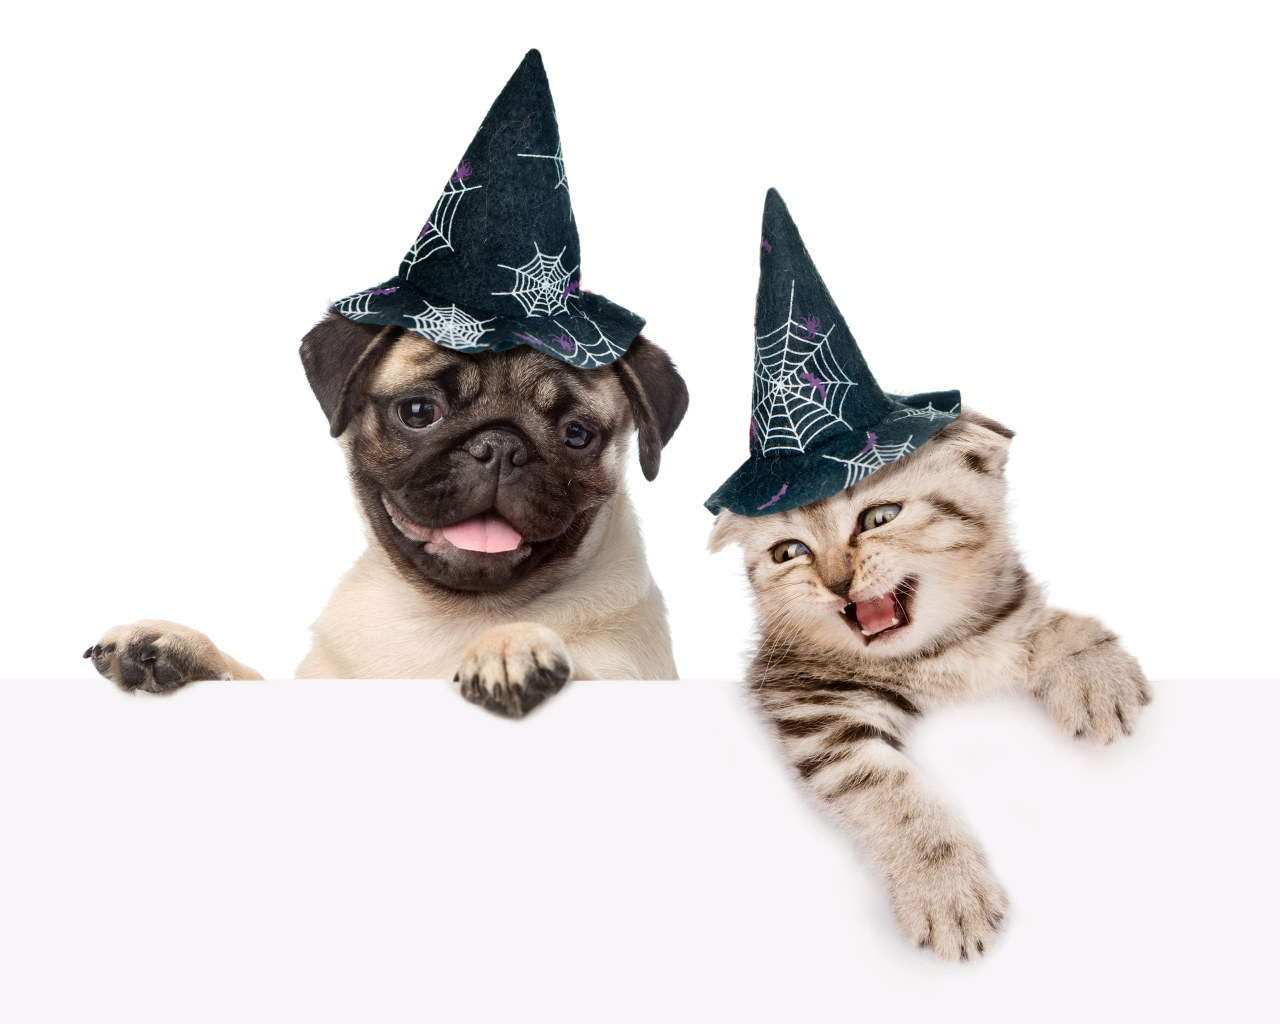 Little pug and kitten in caps on a white background for Halloween